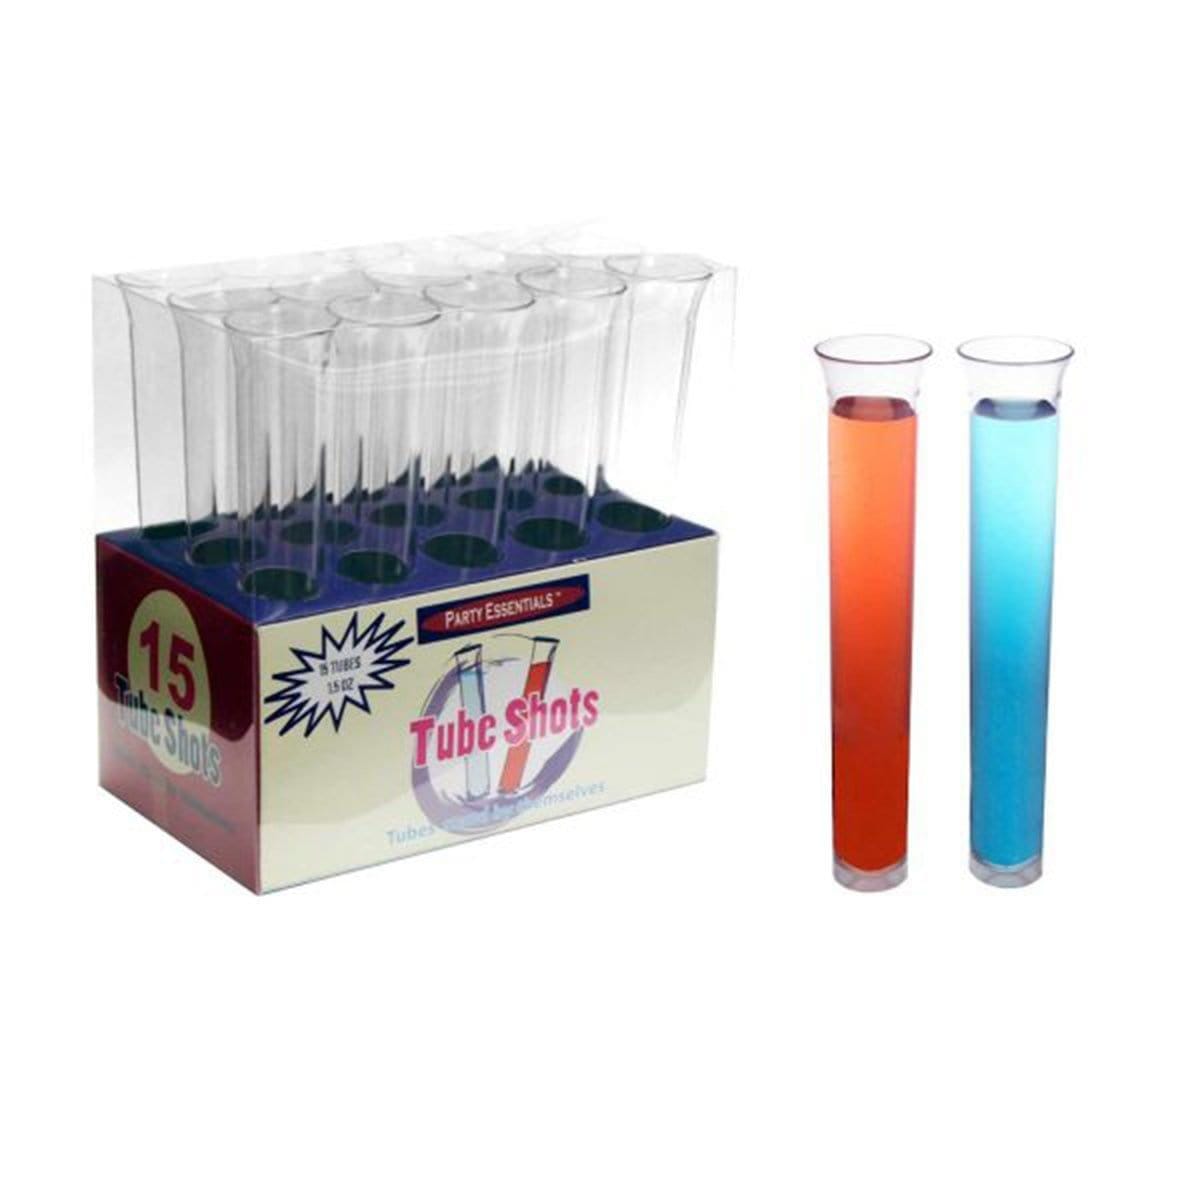 Buy Plasticware Tube Shot 1.5 Oz. 15 Count sold at Party Expert